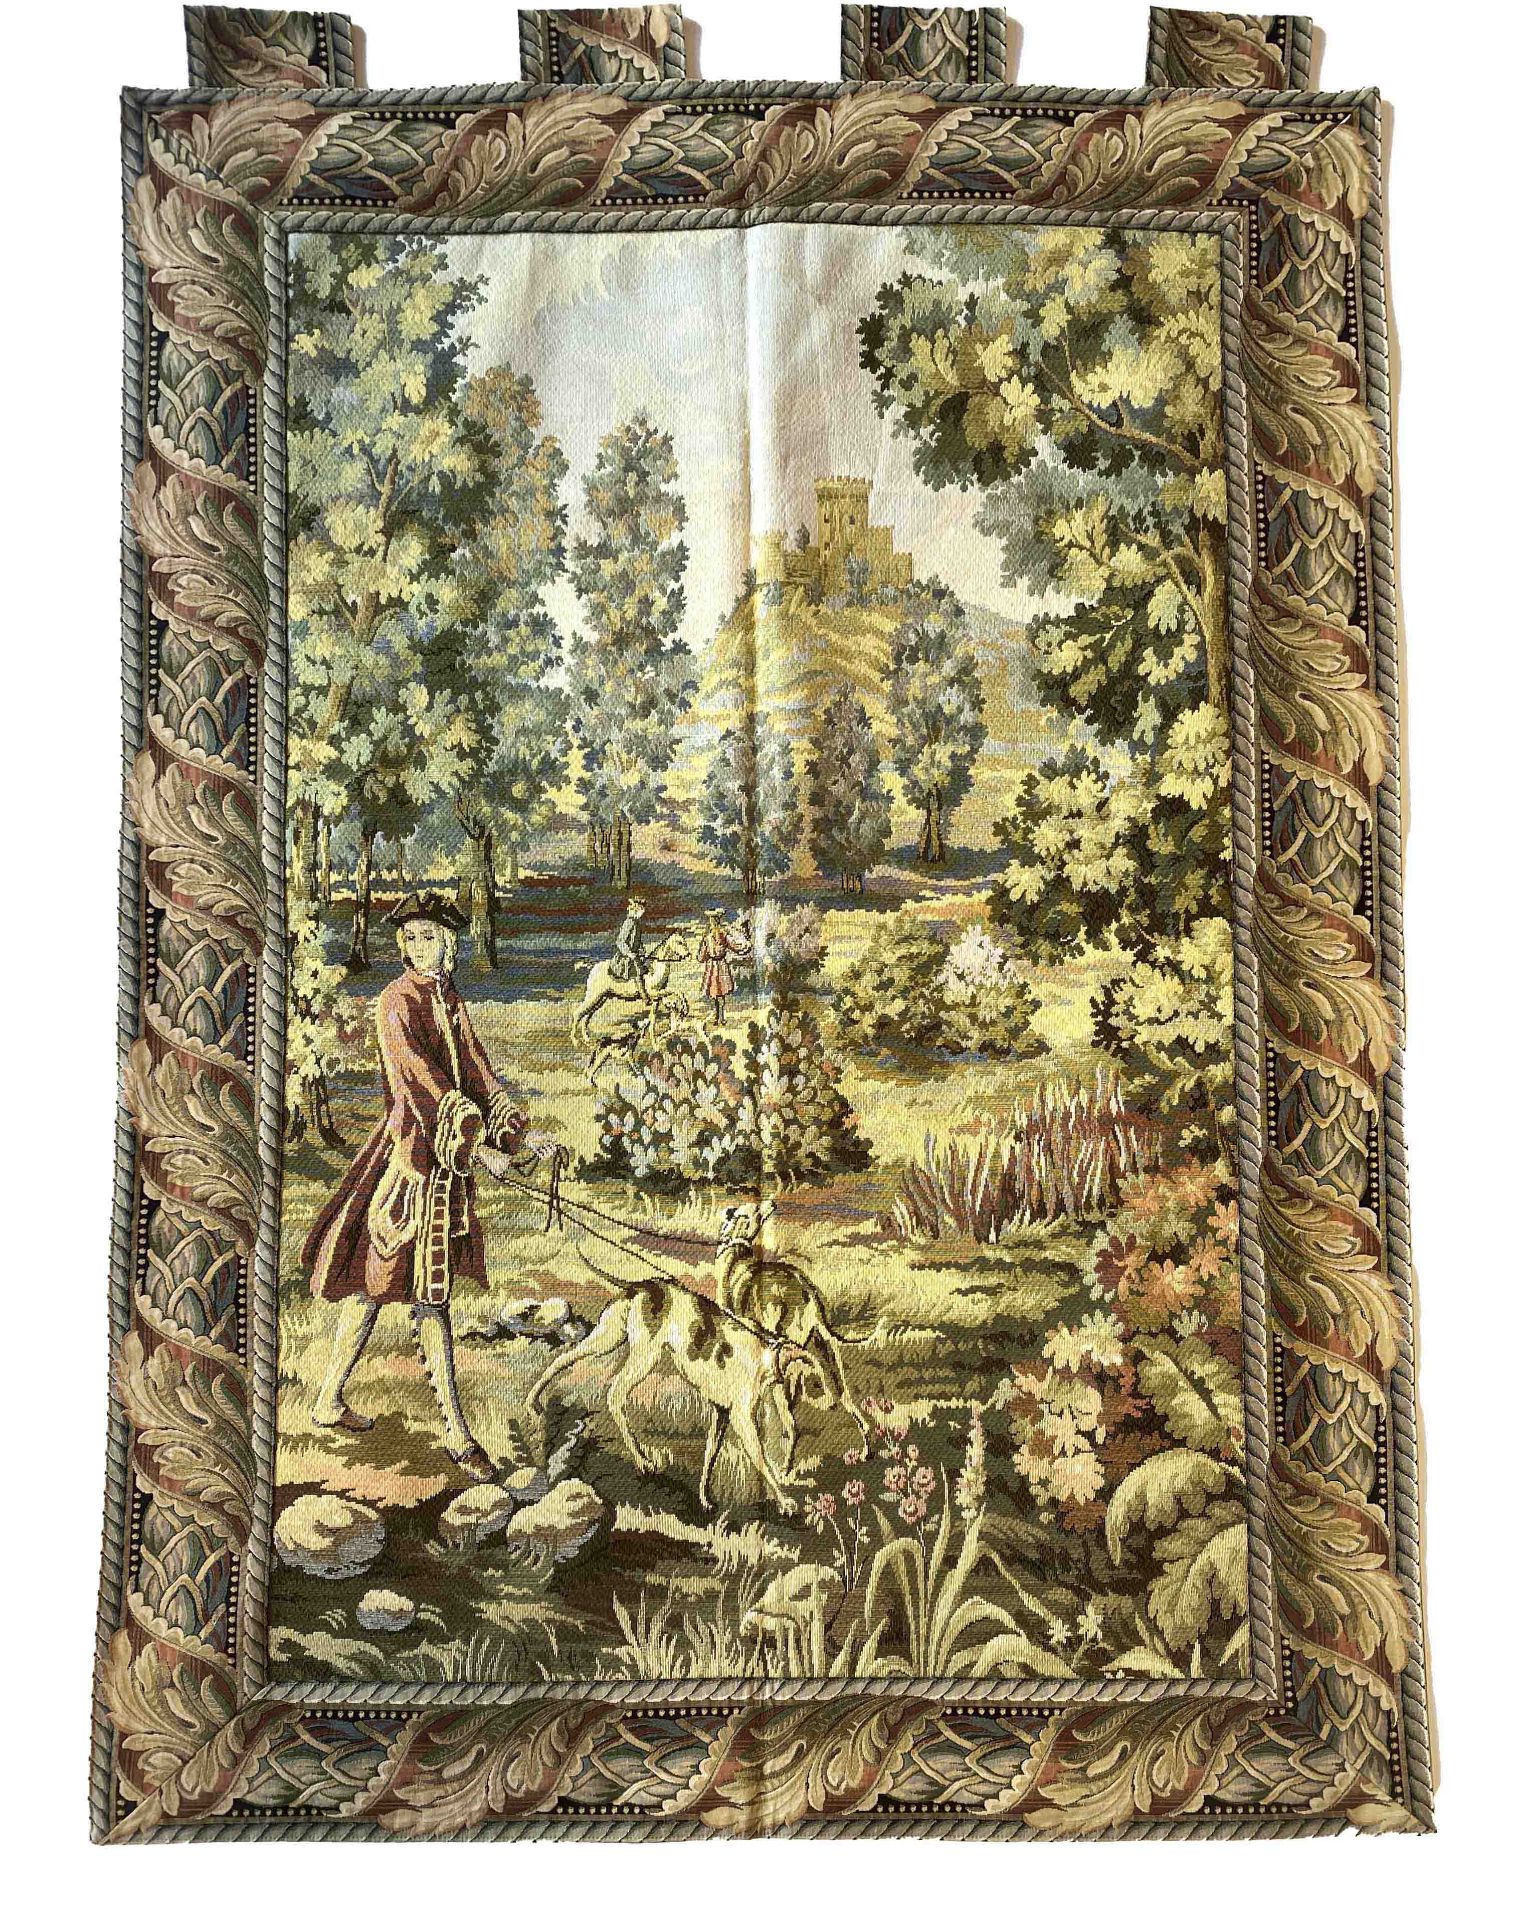 Gobelin, good condition, 140 x 110 cm - The carpet can only be viewed and collected at another